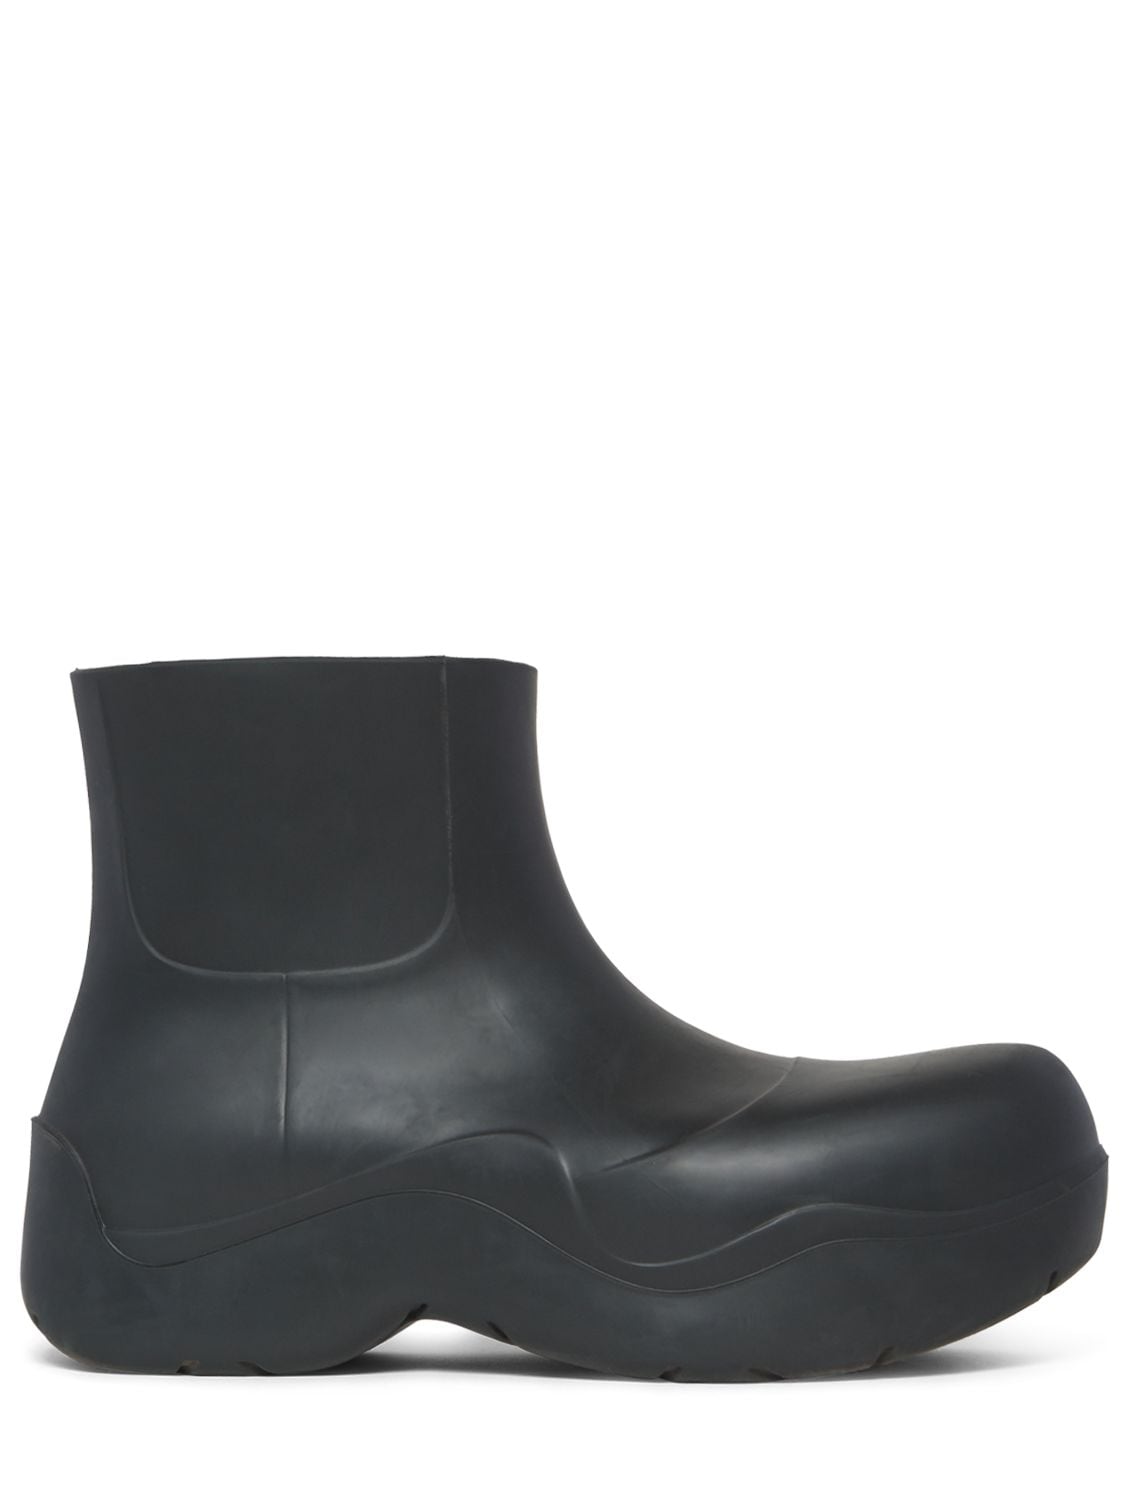 Puddle Matter Rubber Boots